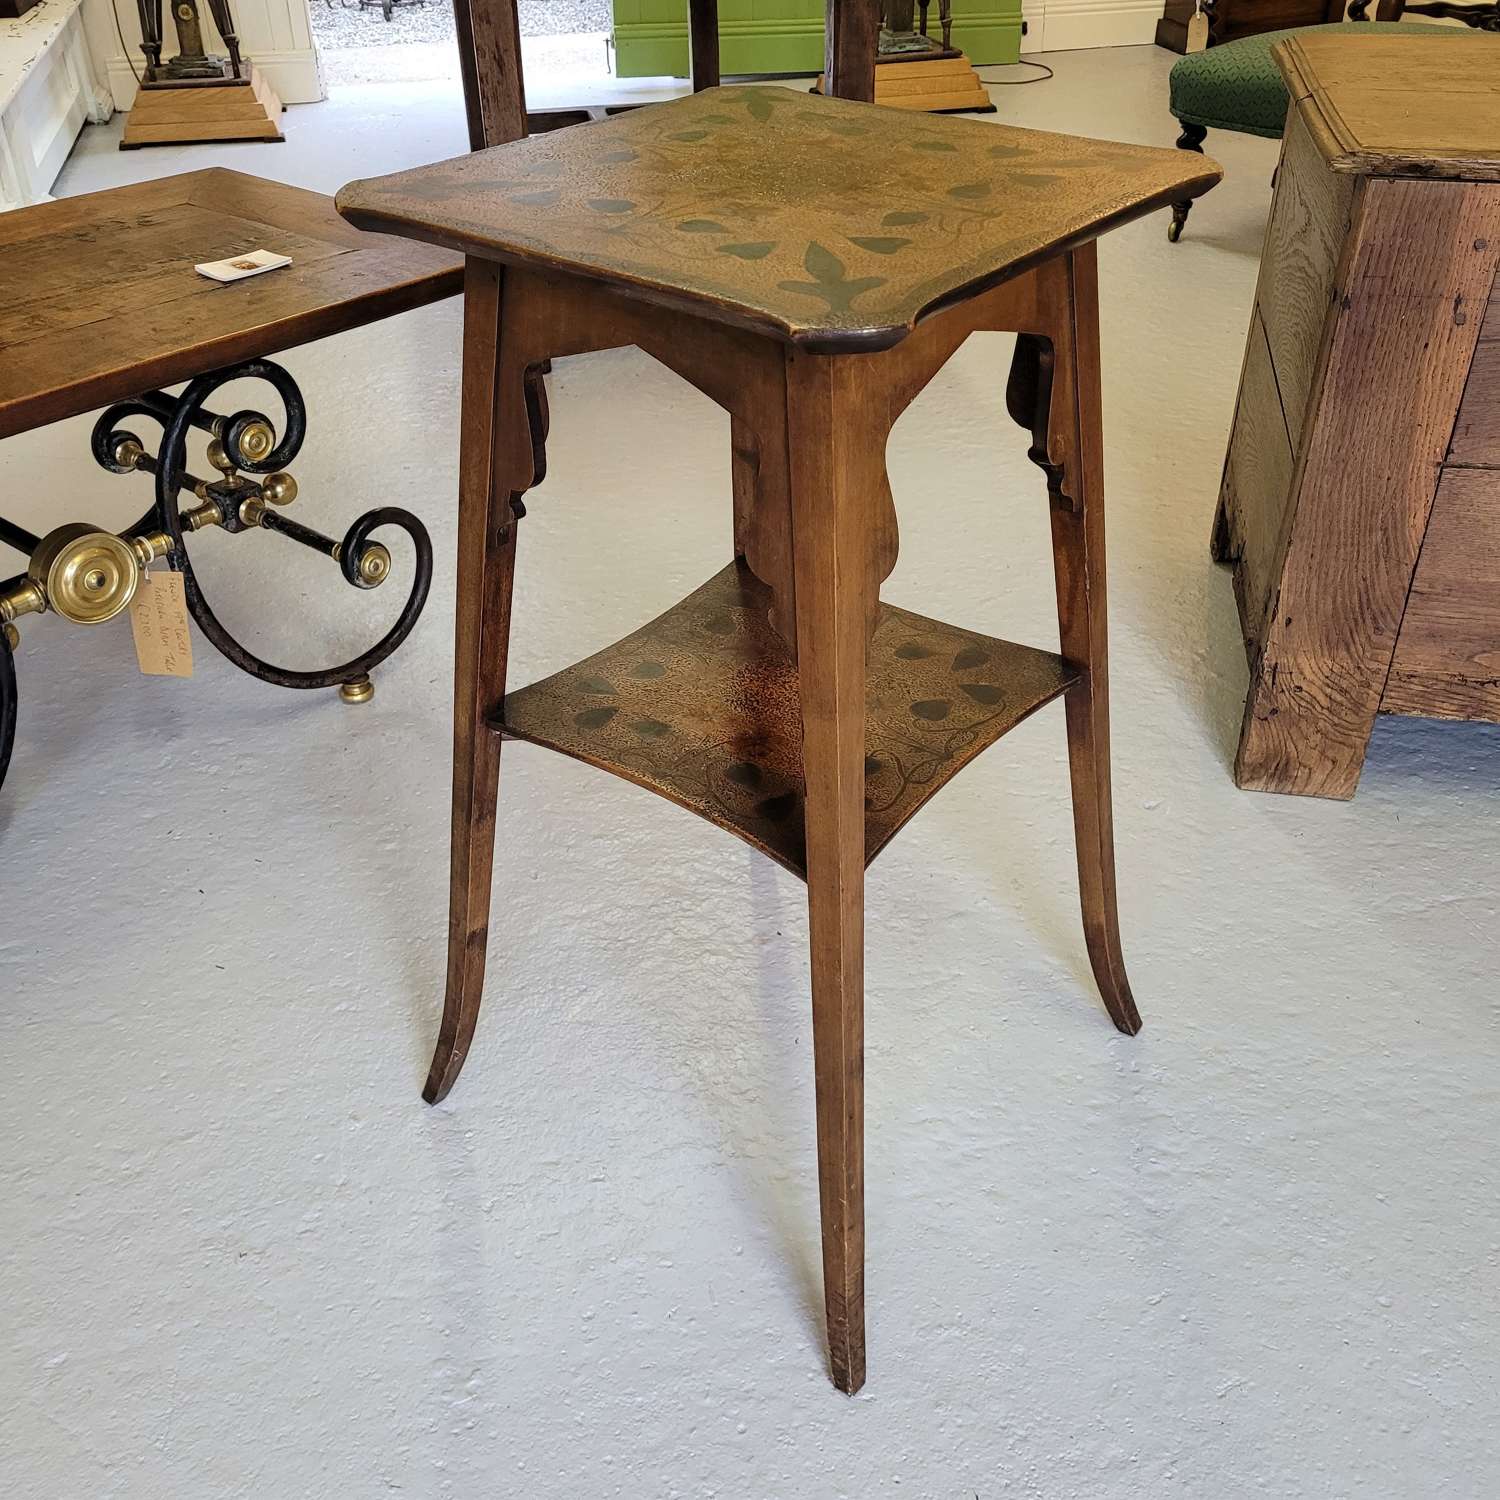 Late 19th century Arts and Crafts occasional table